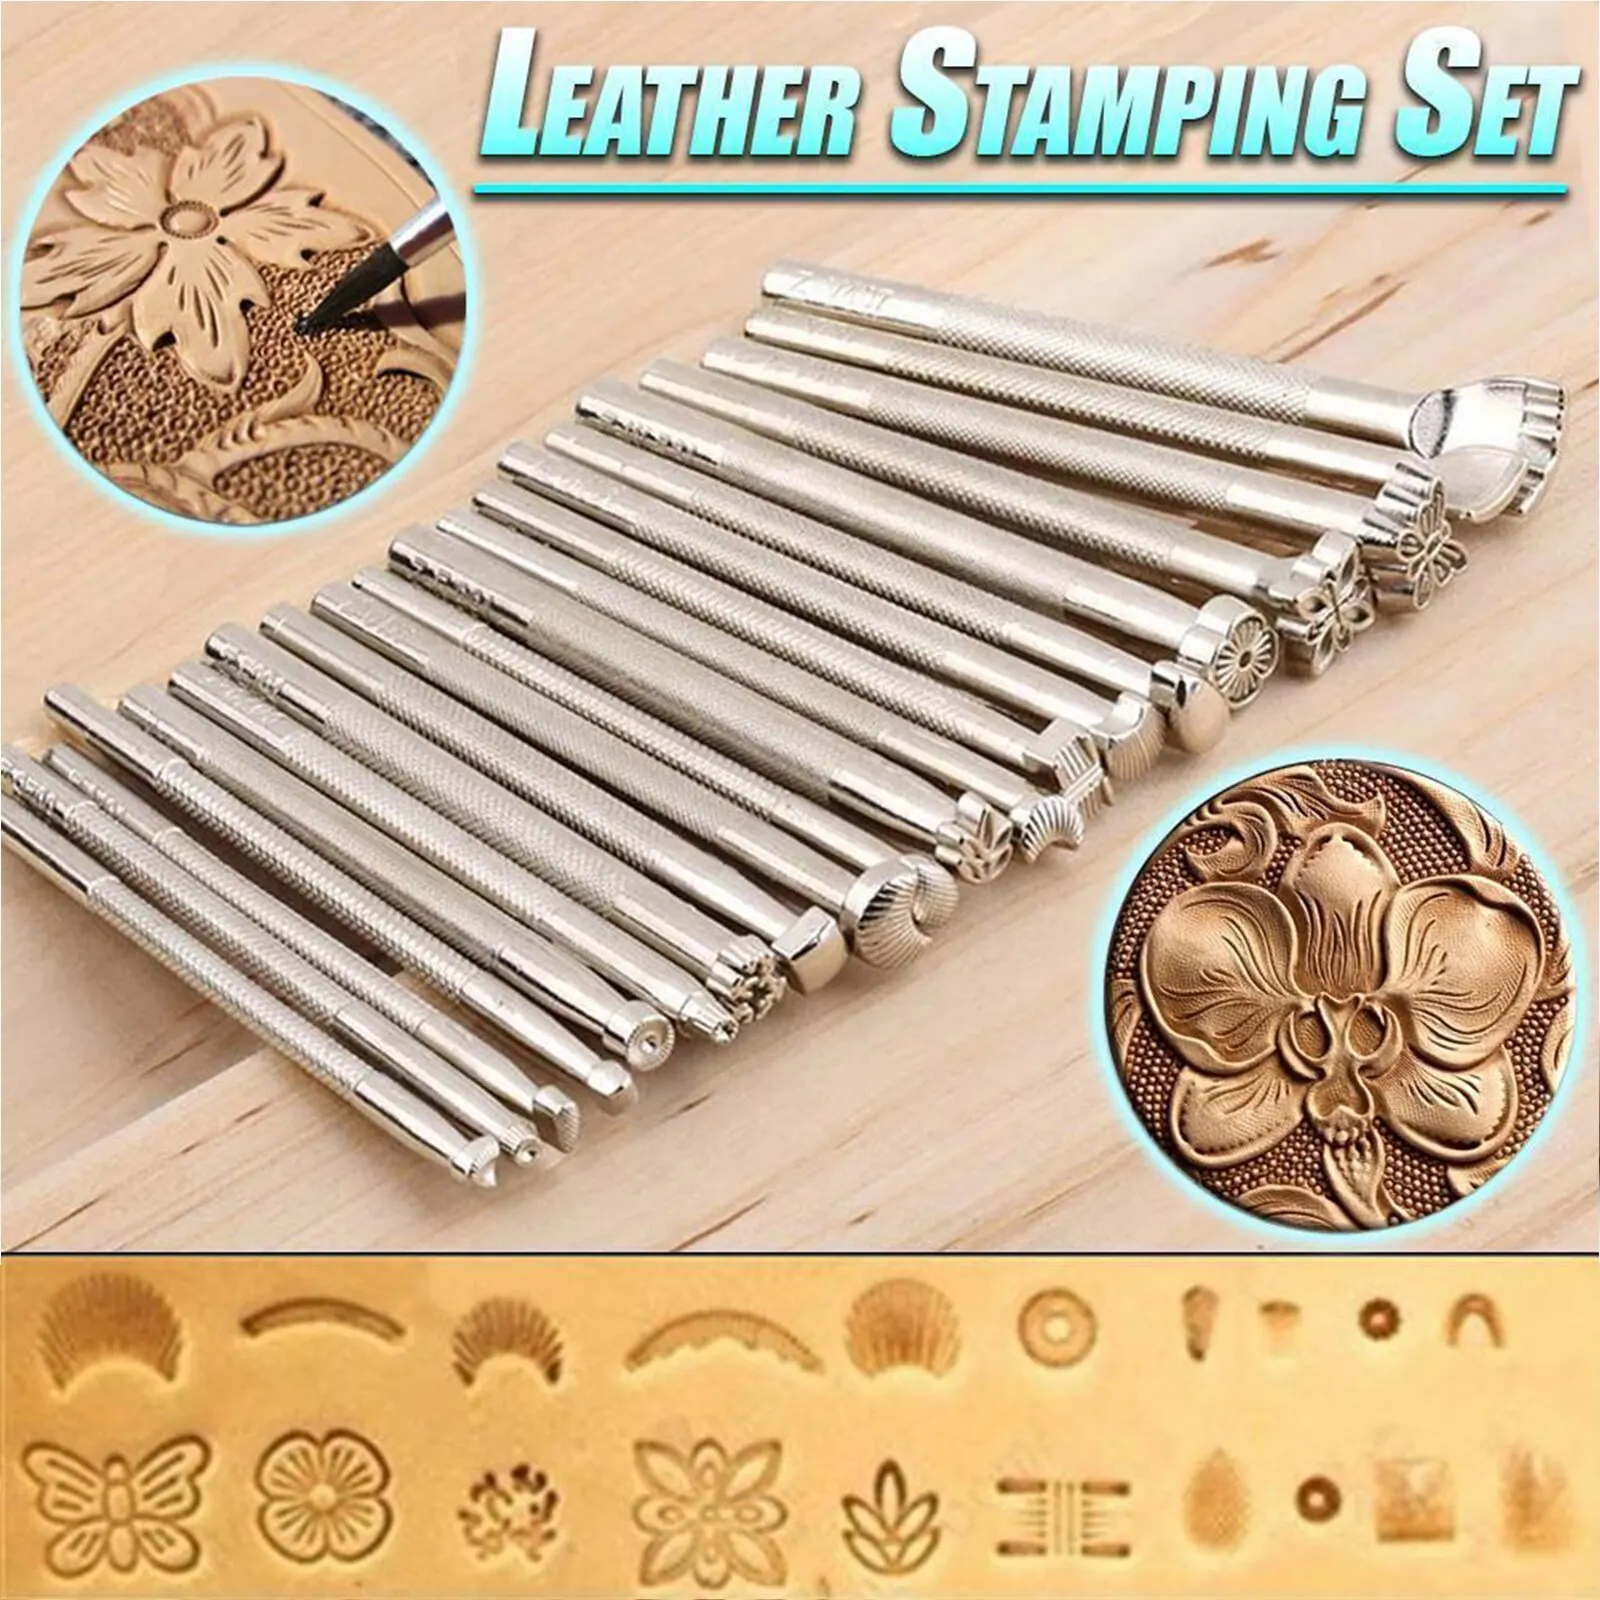 Sturdy Solid Metal AVGDeals 20 pcs Leather Working Saddle Making Tools Leather Craft Stamps Set Its Durable to use 